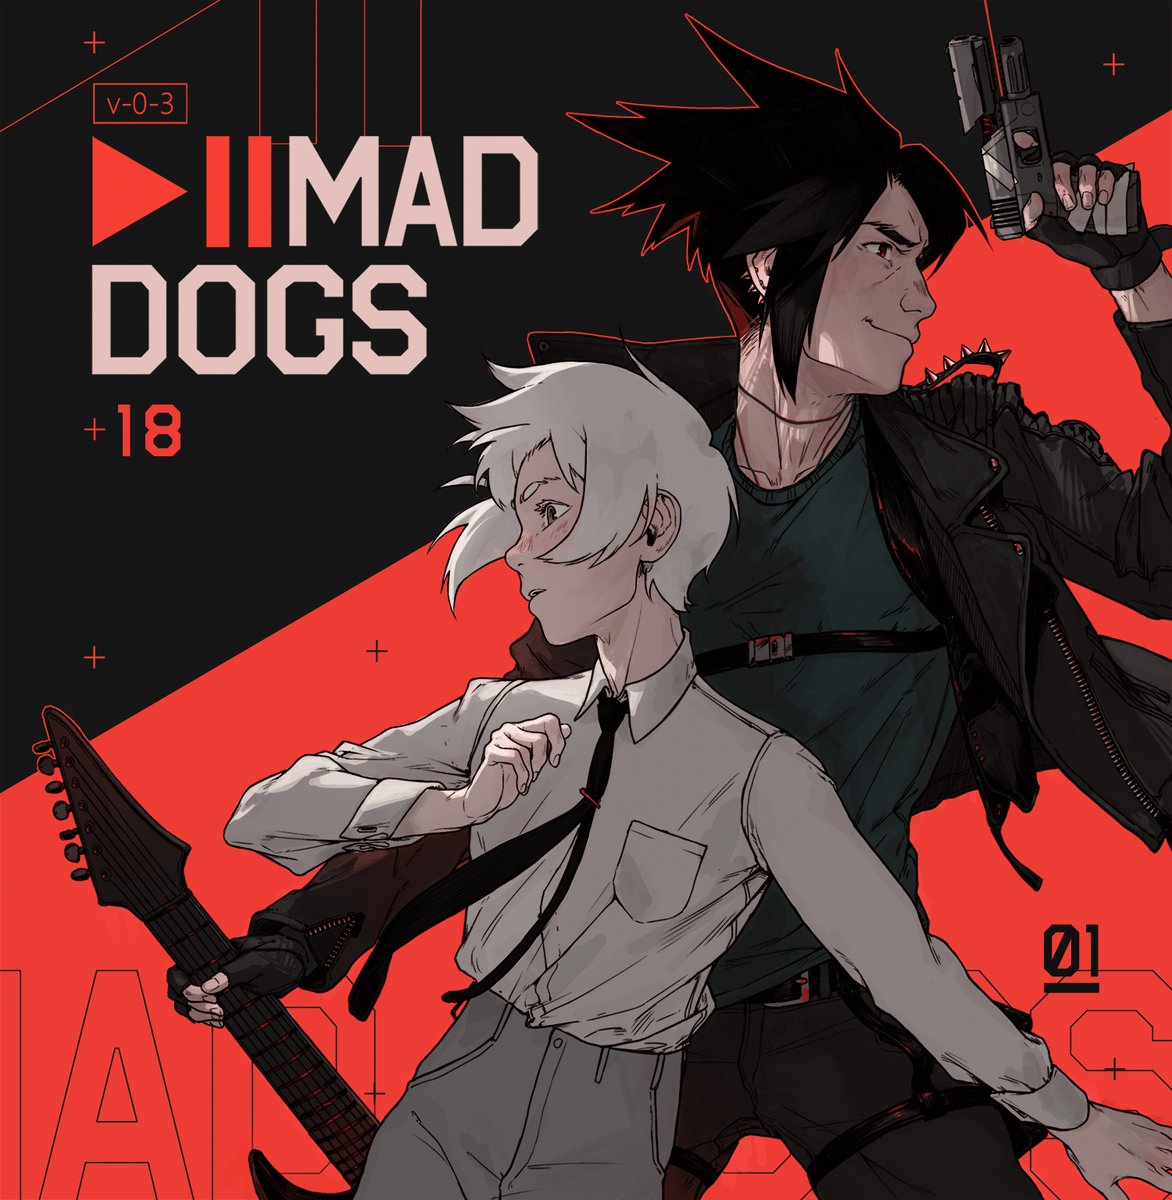 Hello new followers! Let me introduce myself!
I'm Vi and I draw comics for a living! 🌸❌
MAD DOGS is about a dumb cop with superpowers who tries to hook up with his cooworker,
PAPER ROSES is about self aware robot with a life crisis. Basicaly.

Links below! 